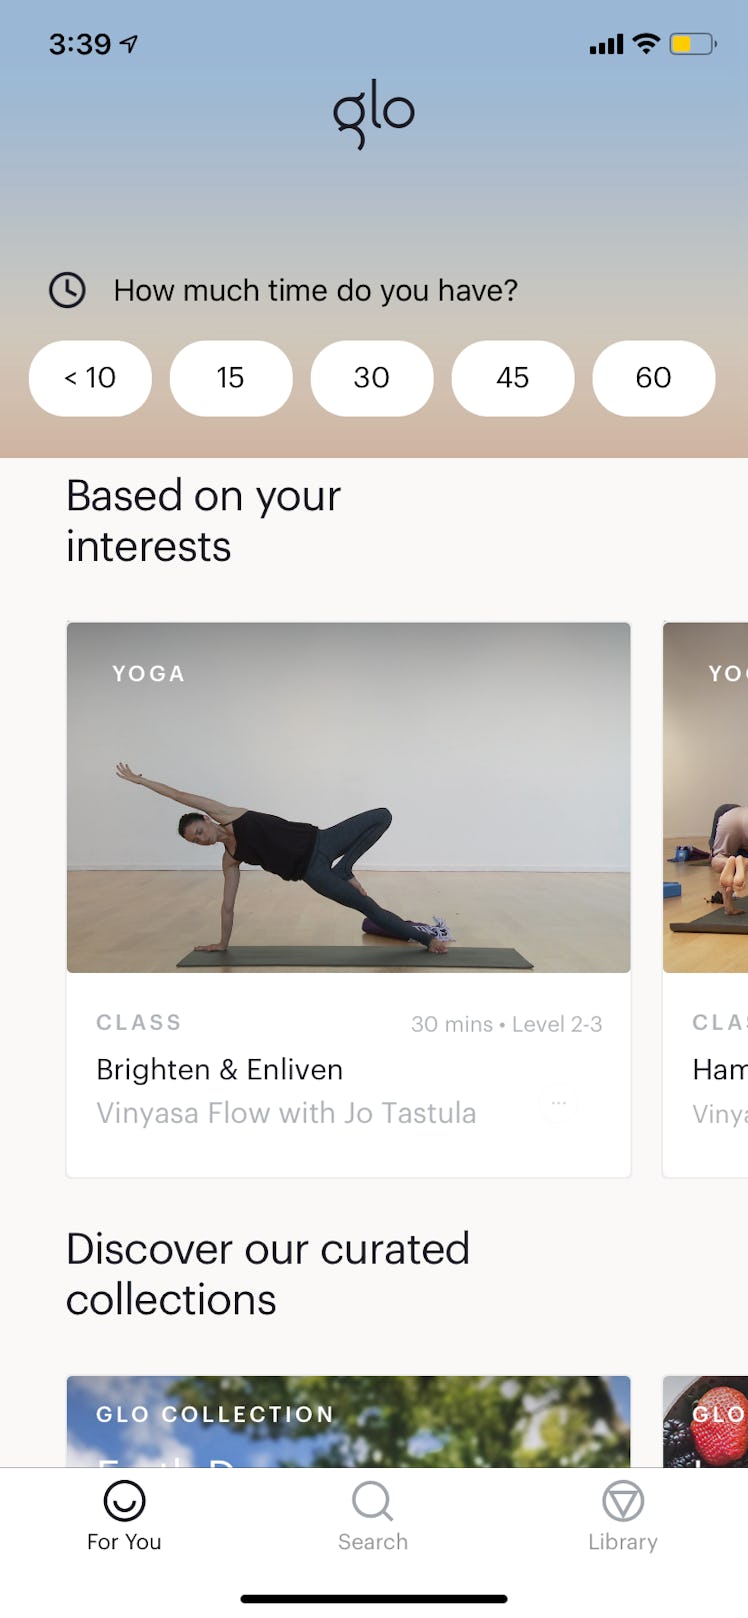 The Glo - Yoga and Meditation app features tons of unique classes of varying lengths.